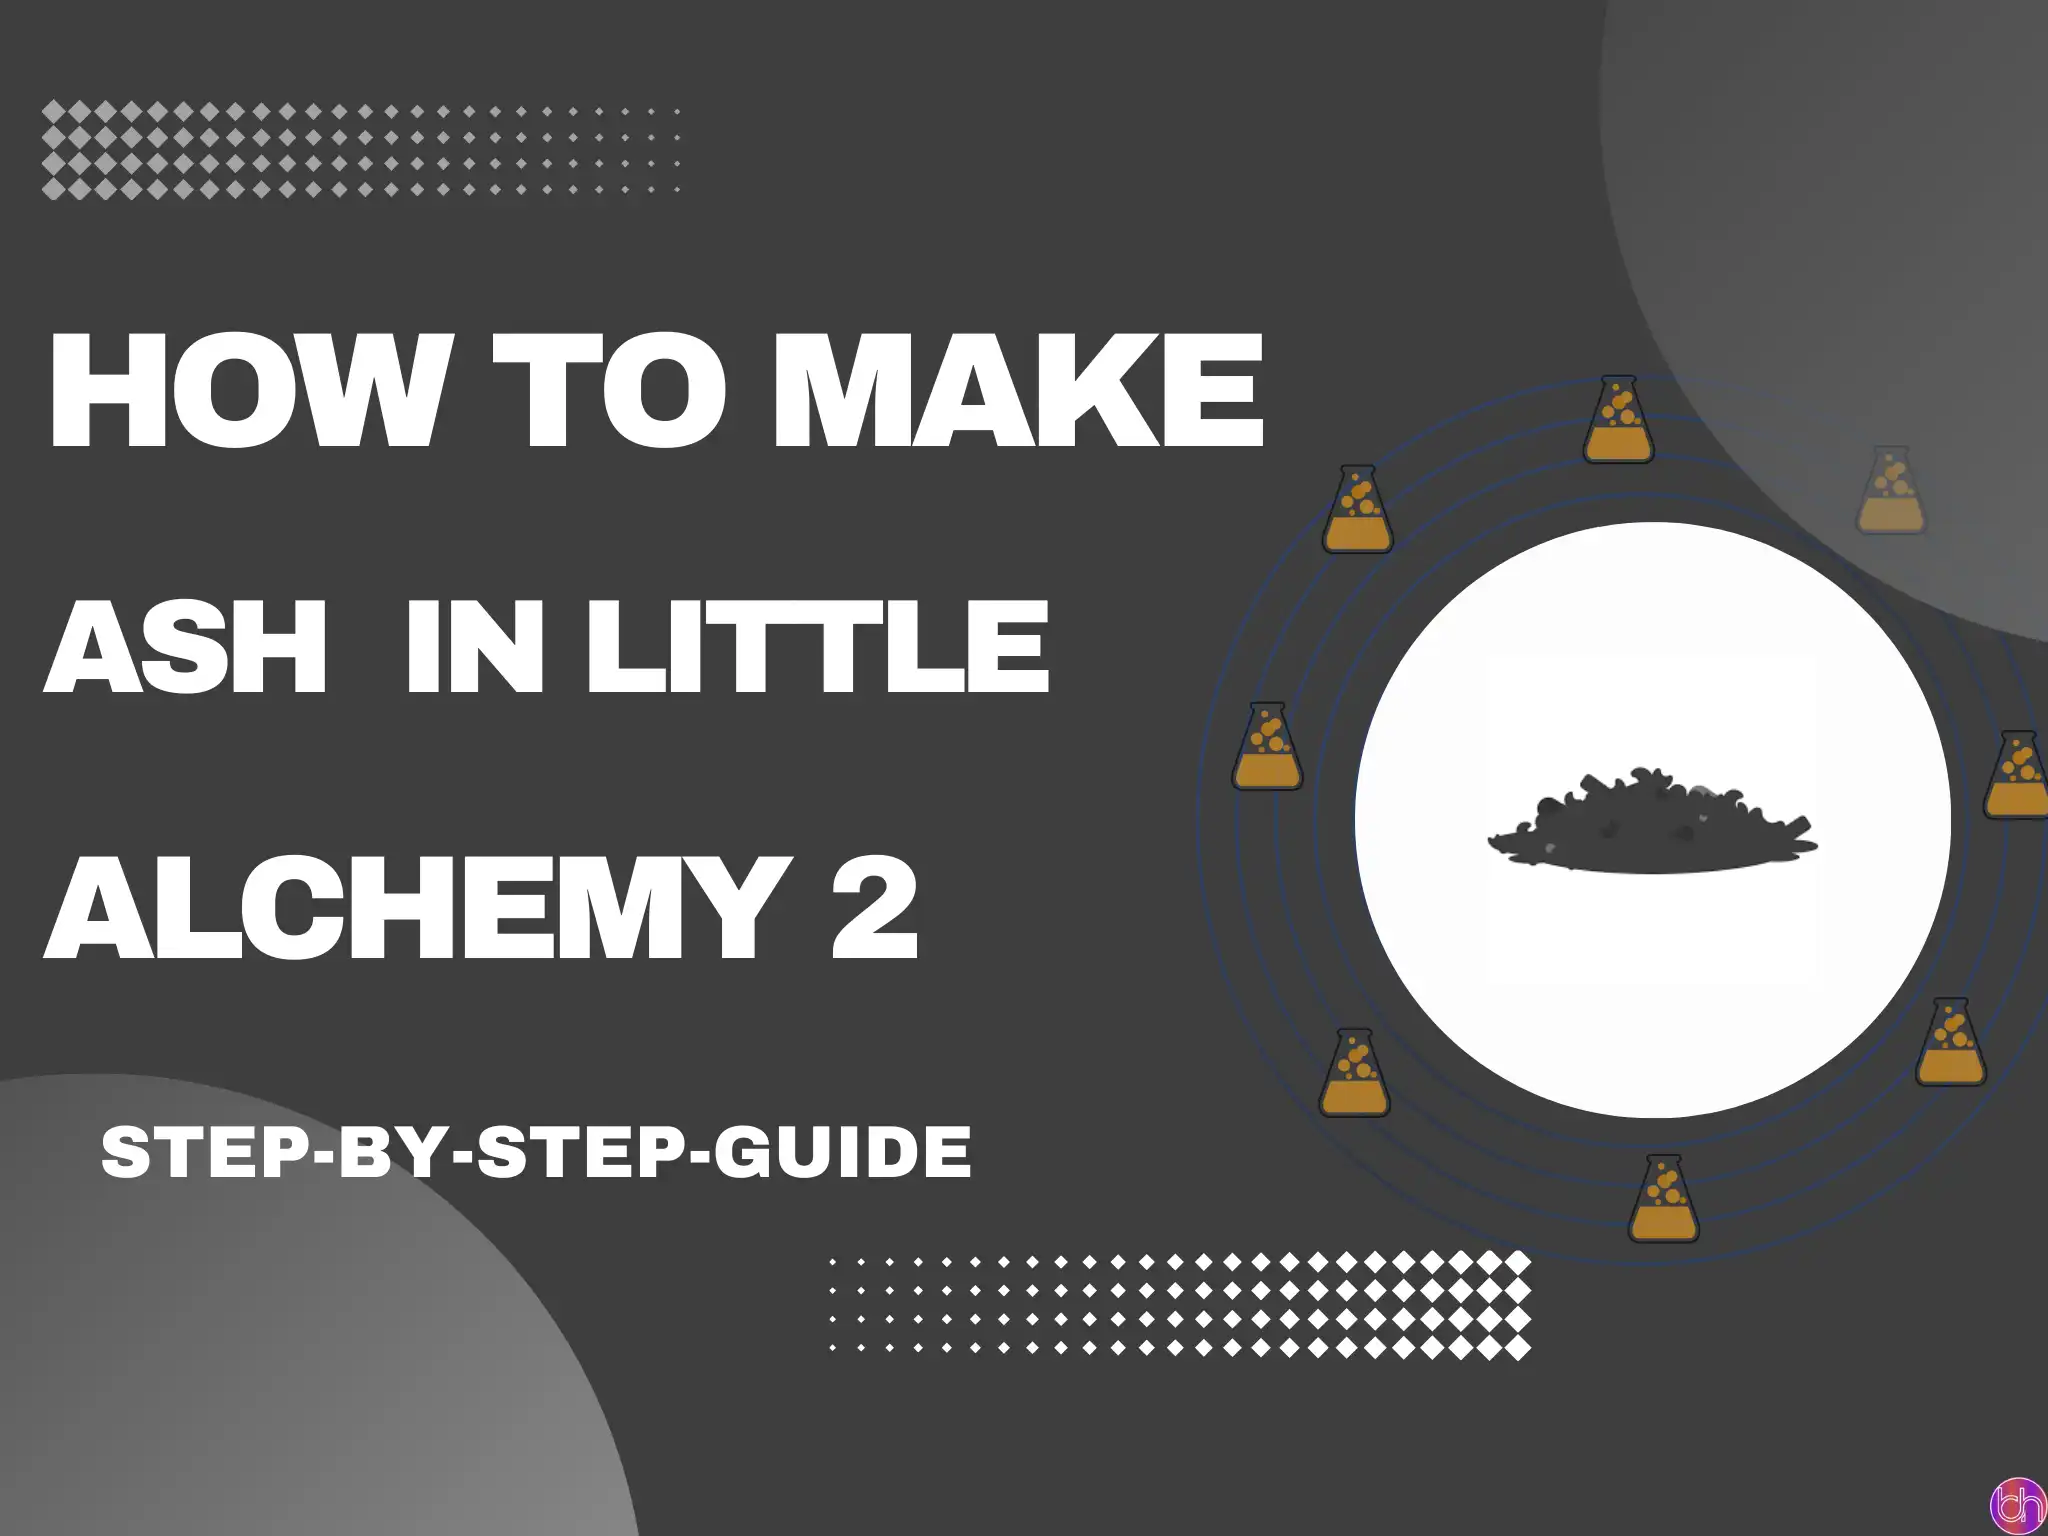 How to make Ash in Little Alchemy 2